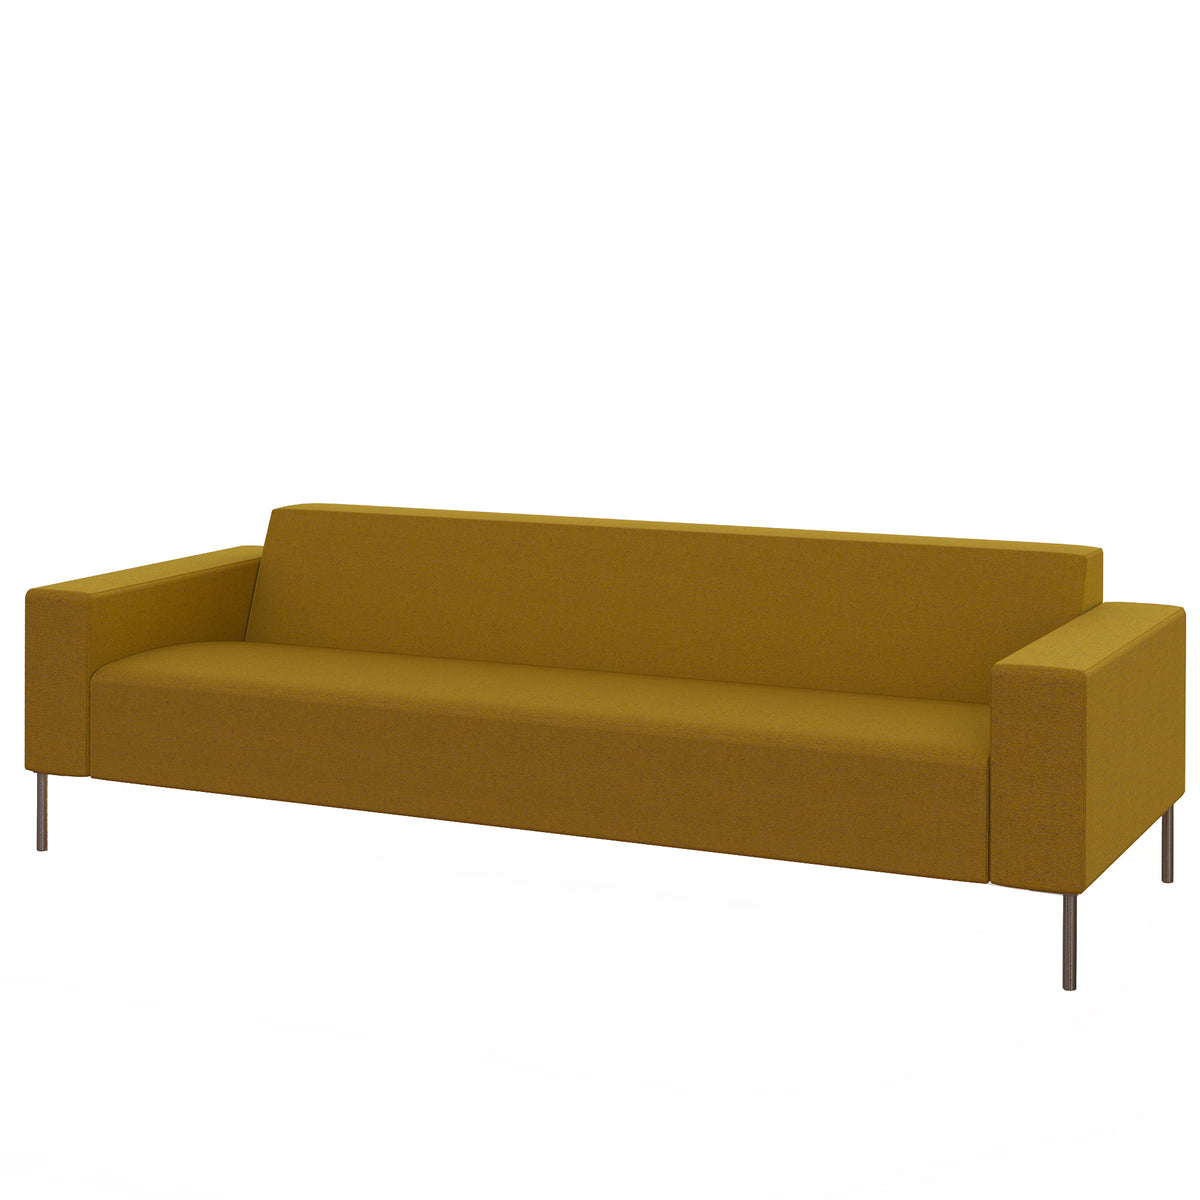 Hitch Mylius HM18 Origin Three Seat Sofa Brushed Stainless Steel Legs Tooting